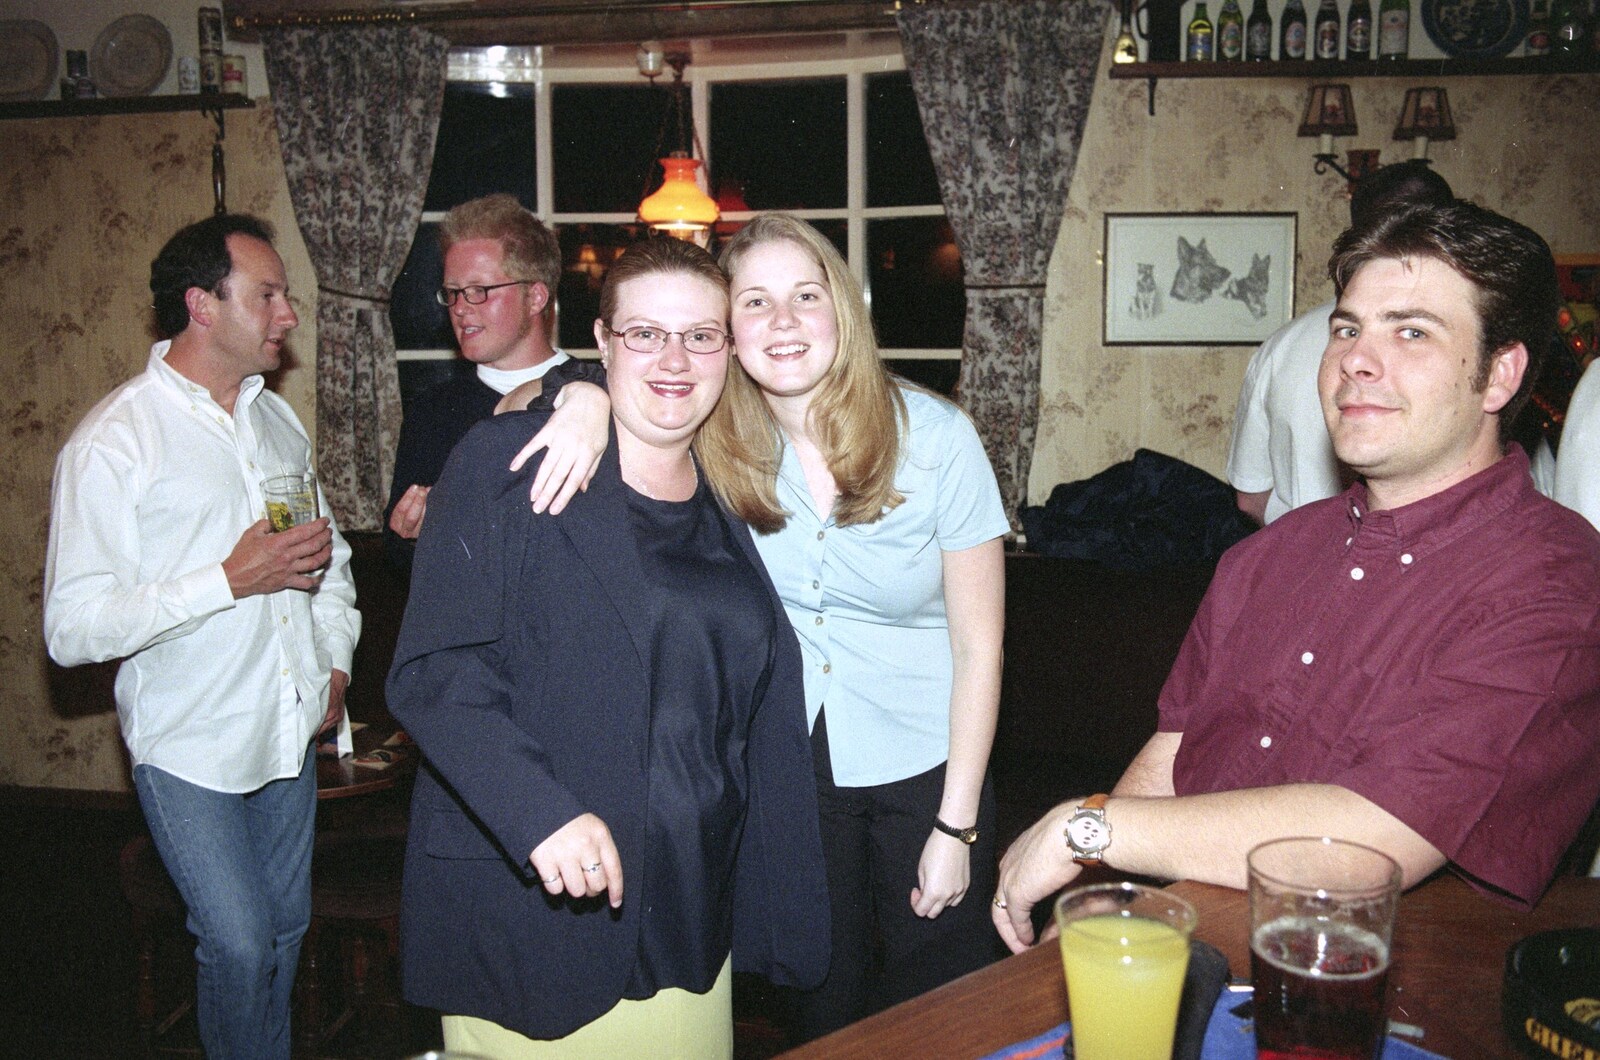 Helen, Lorraine and Neil trying not escape from Wavy's Thirtieth Birthday, The Swan Inn, Brome, Suffolk - 24th May 2000